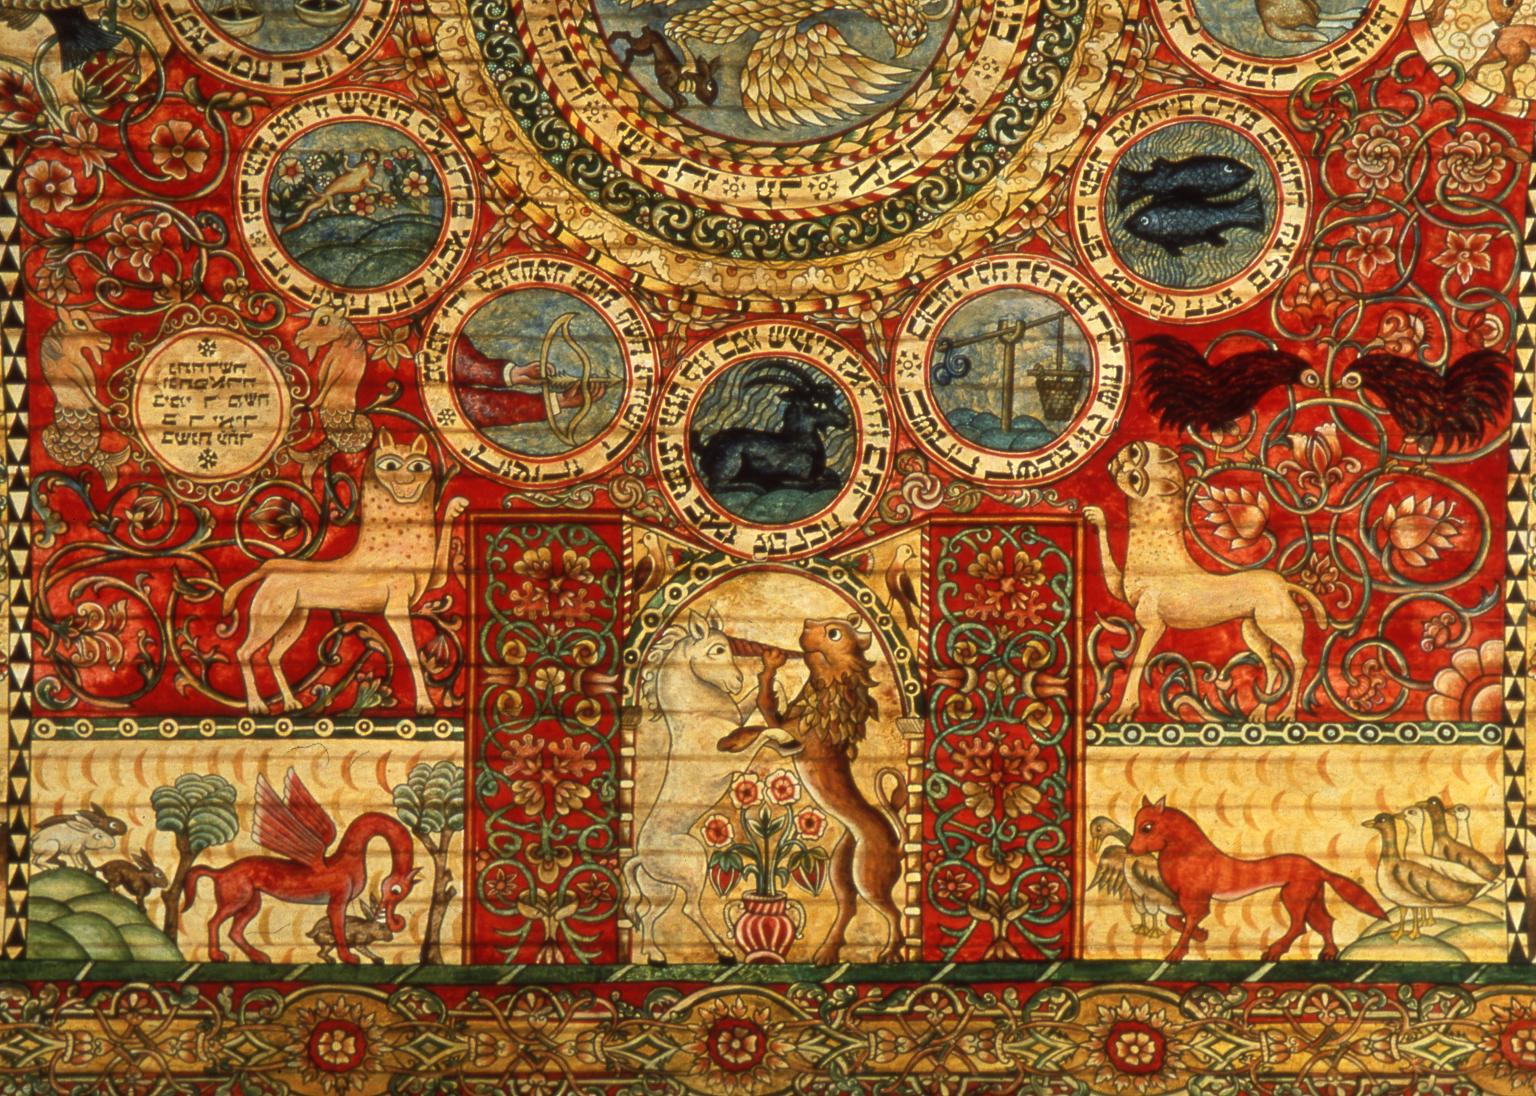 Photograph of wooden ceiling painted with animals, zodiac symbols inside circles, and floral designs.